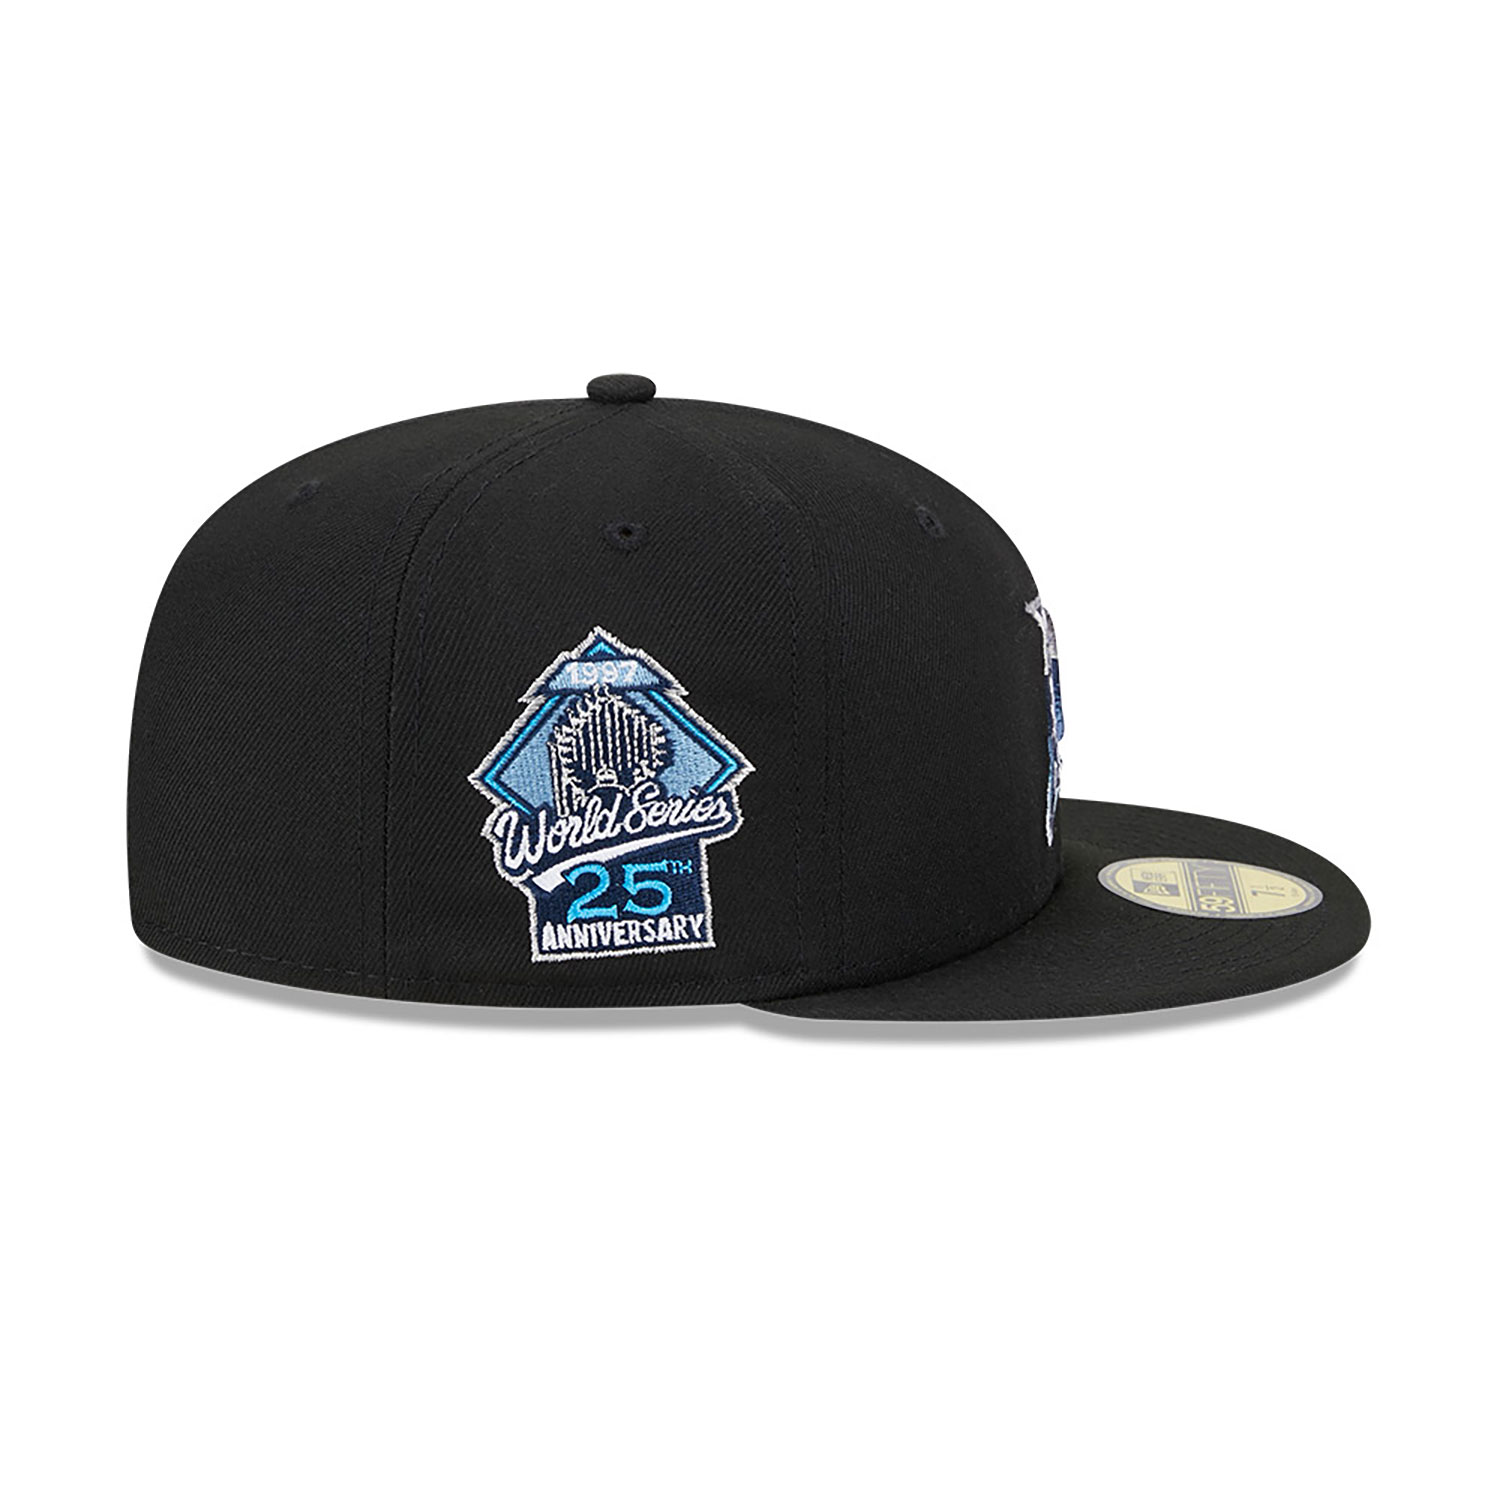 Miami Marlins Raceway Black 59FIFTY Fitted Cap